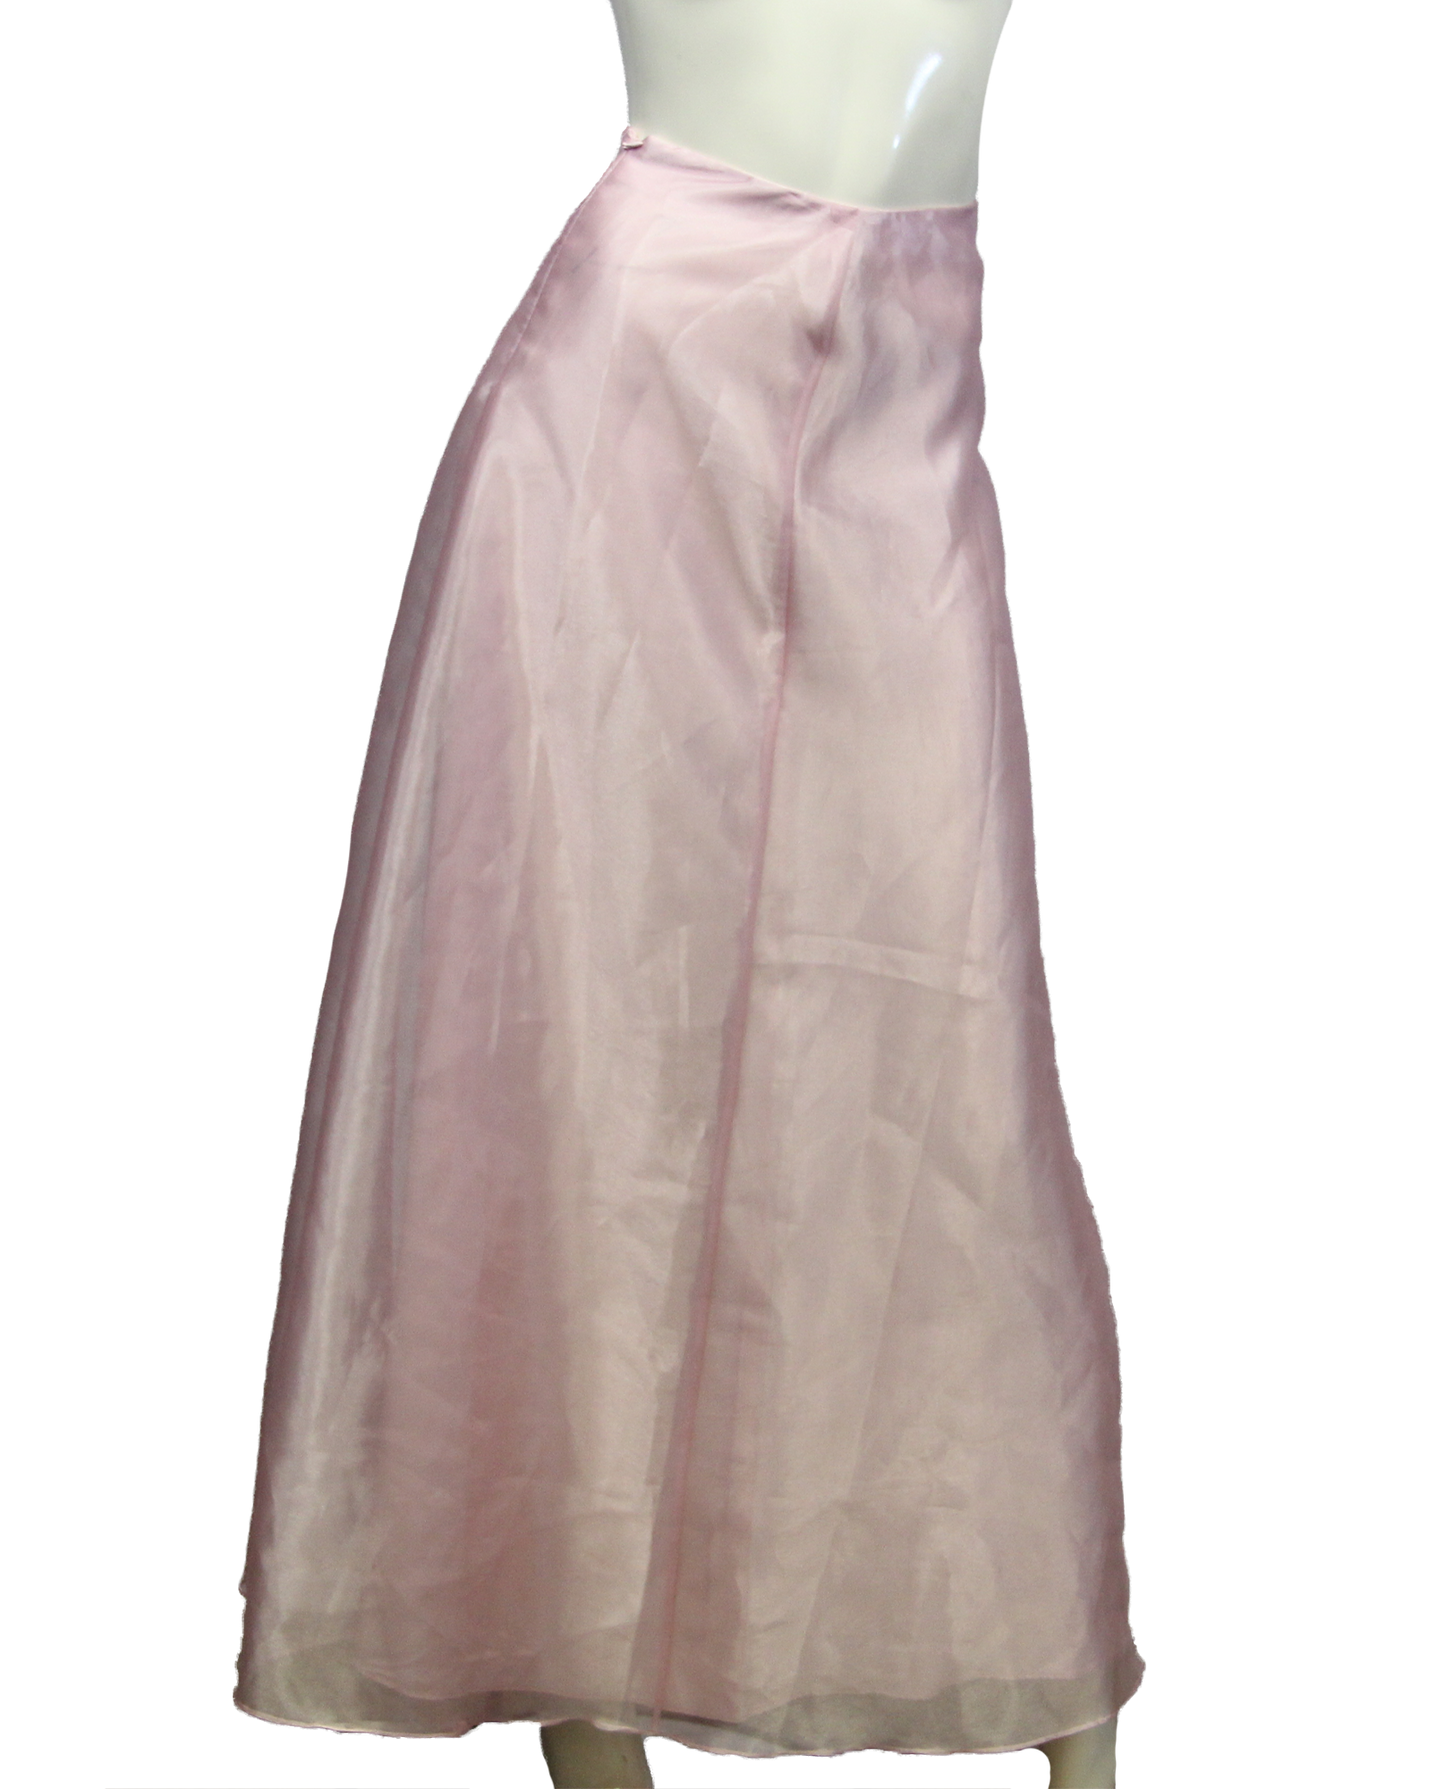 Belle of the Ball Maxi Pink Skirt Size S (SKU 000026) - Designers On A Dime - 4